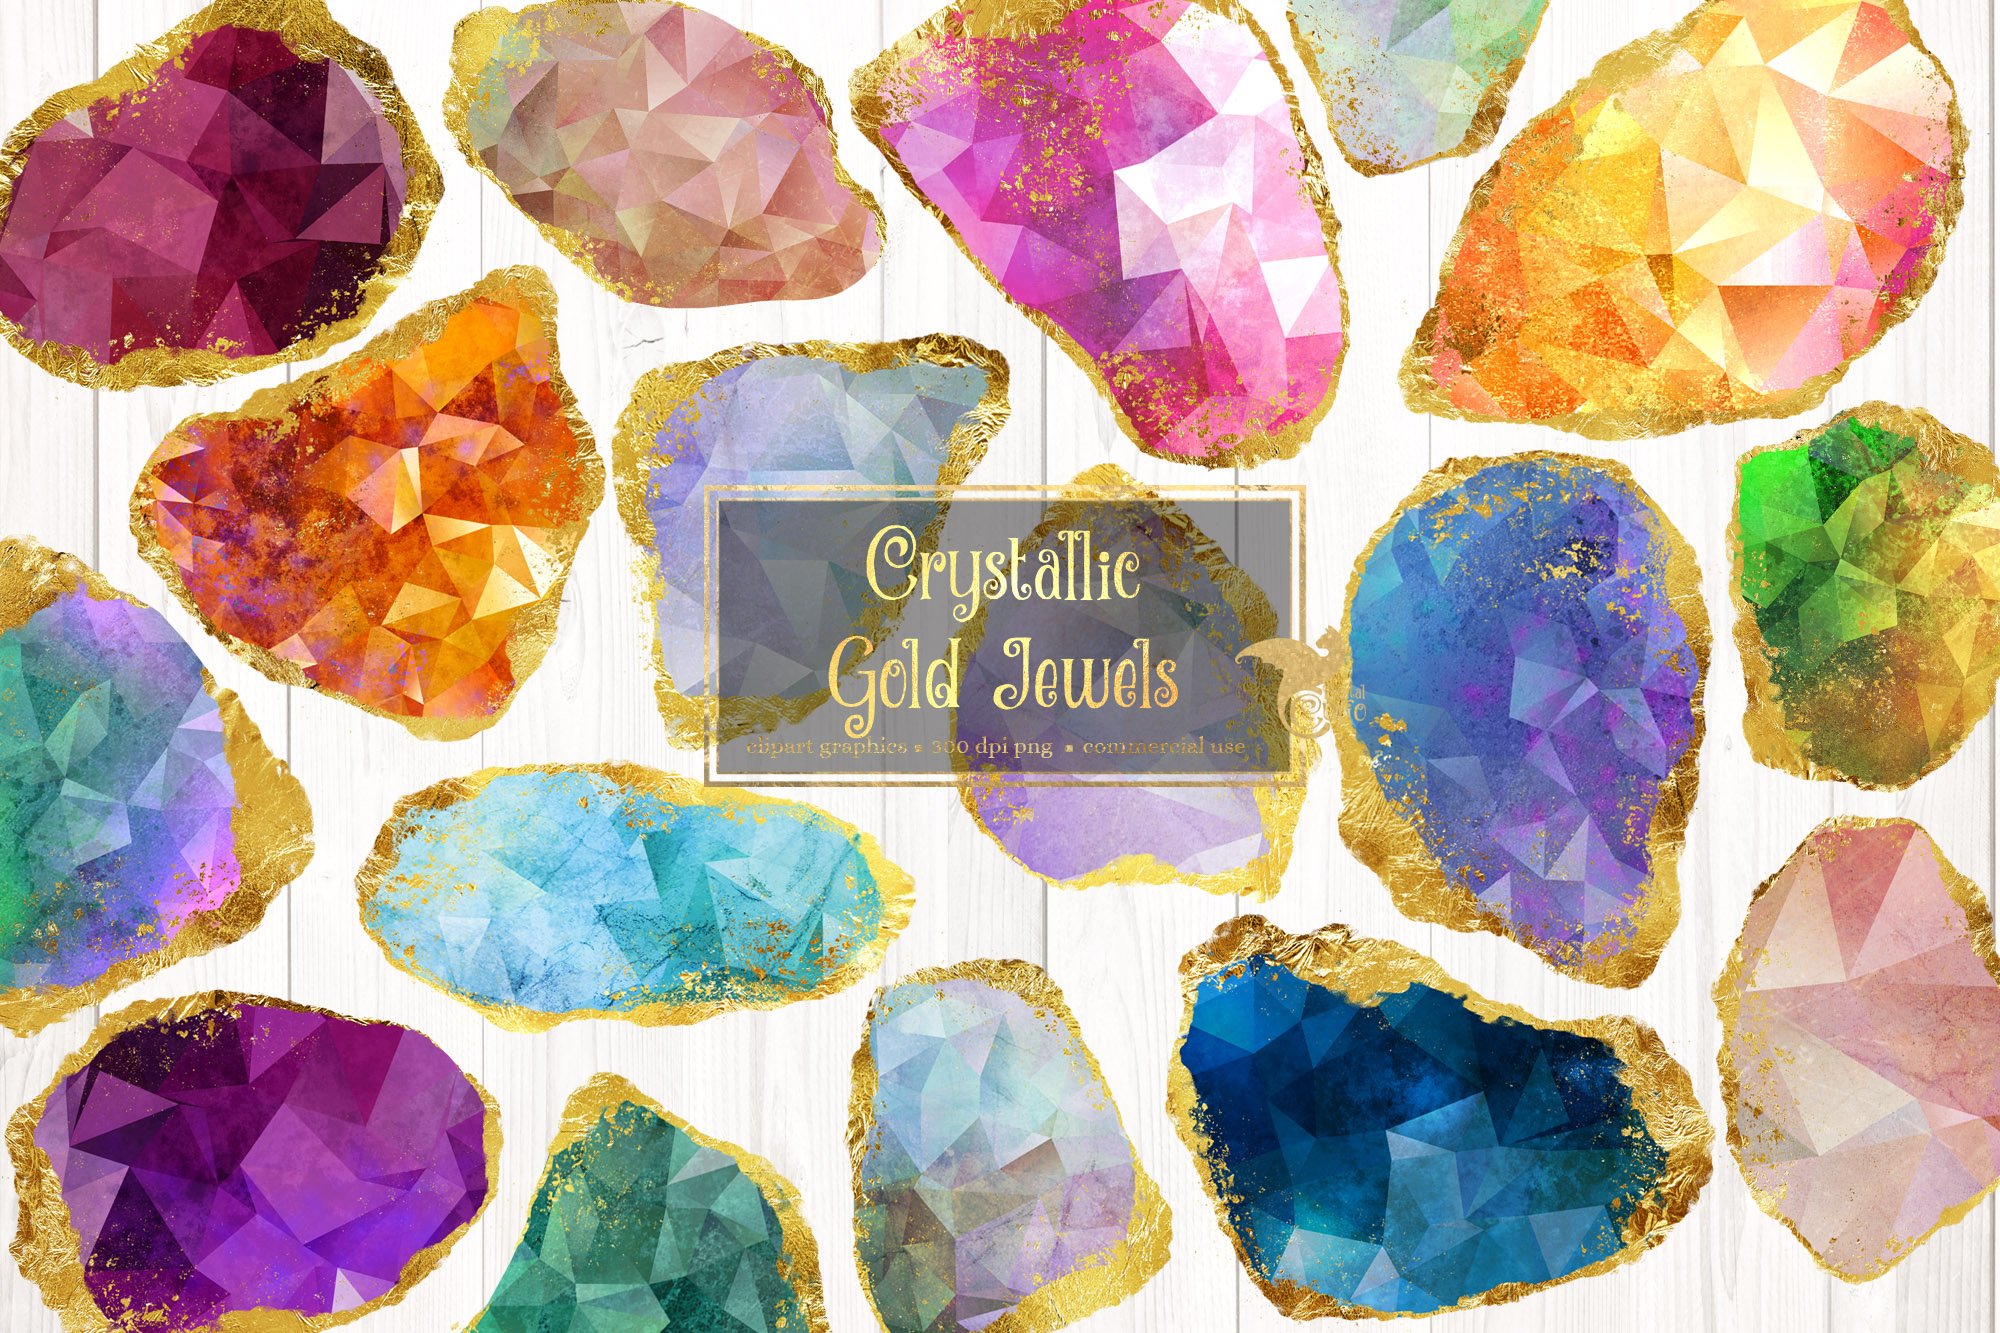 Crystallic Gold Jewels Clipart cover image.